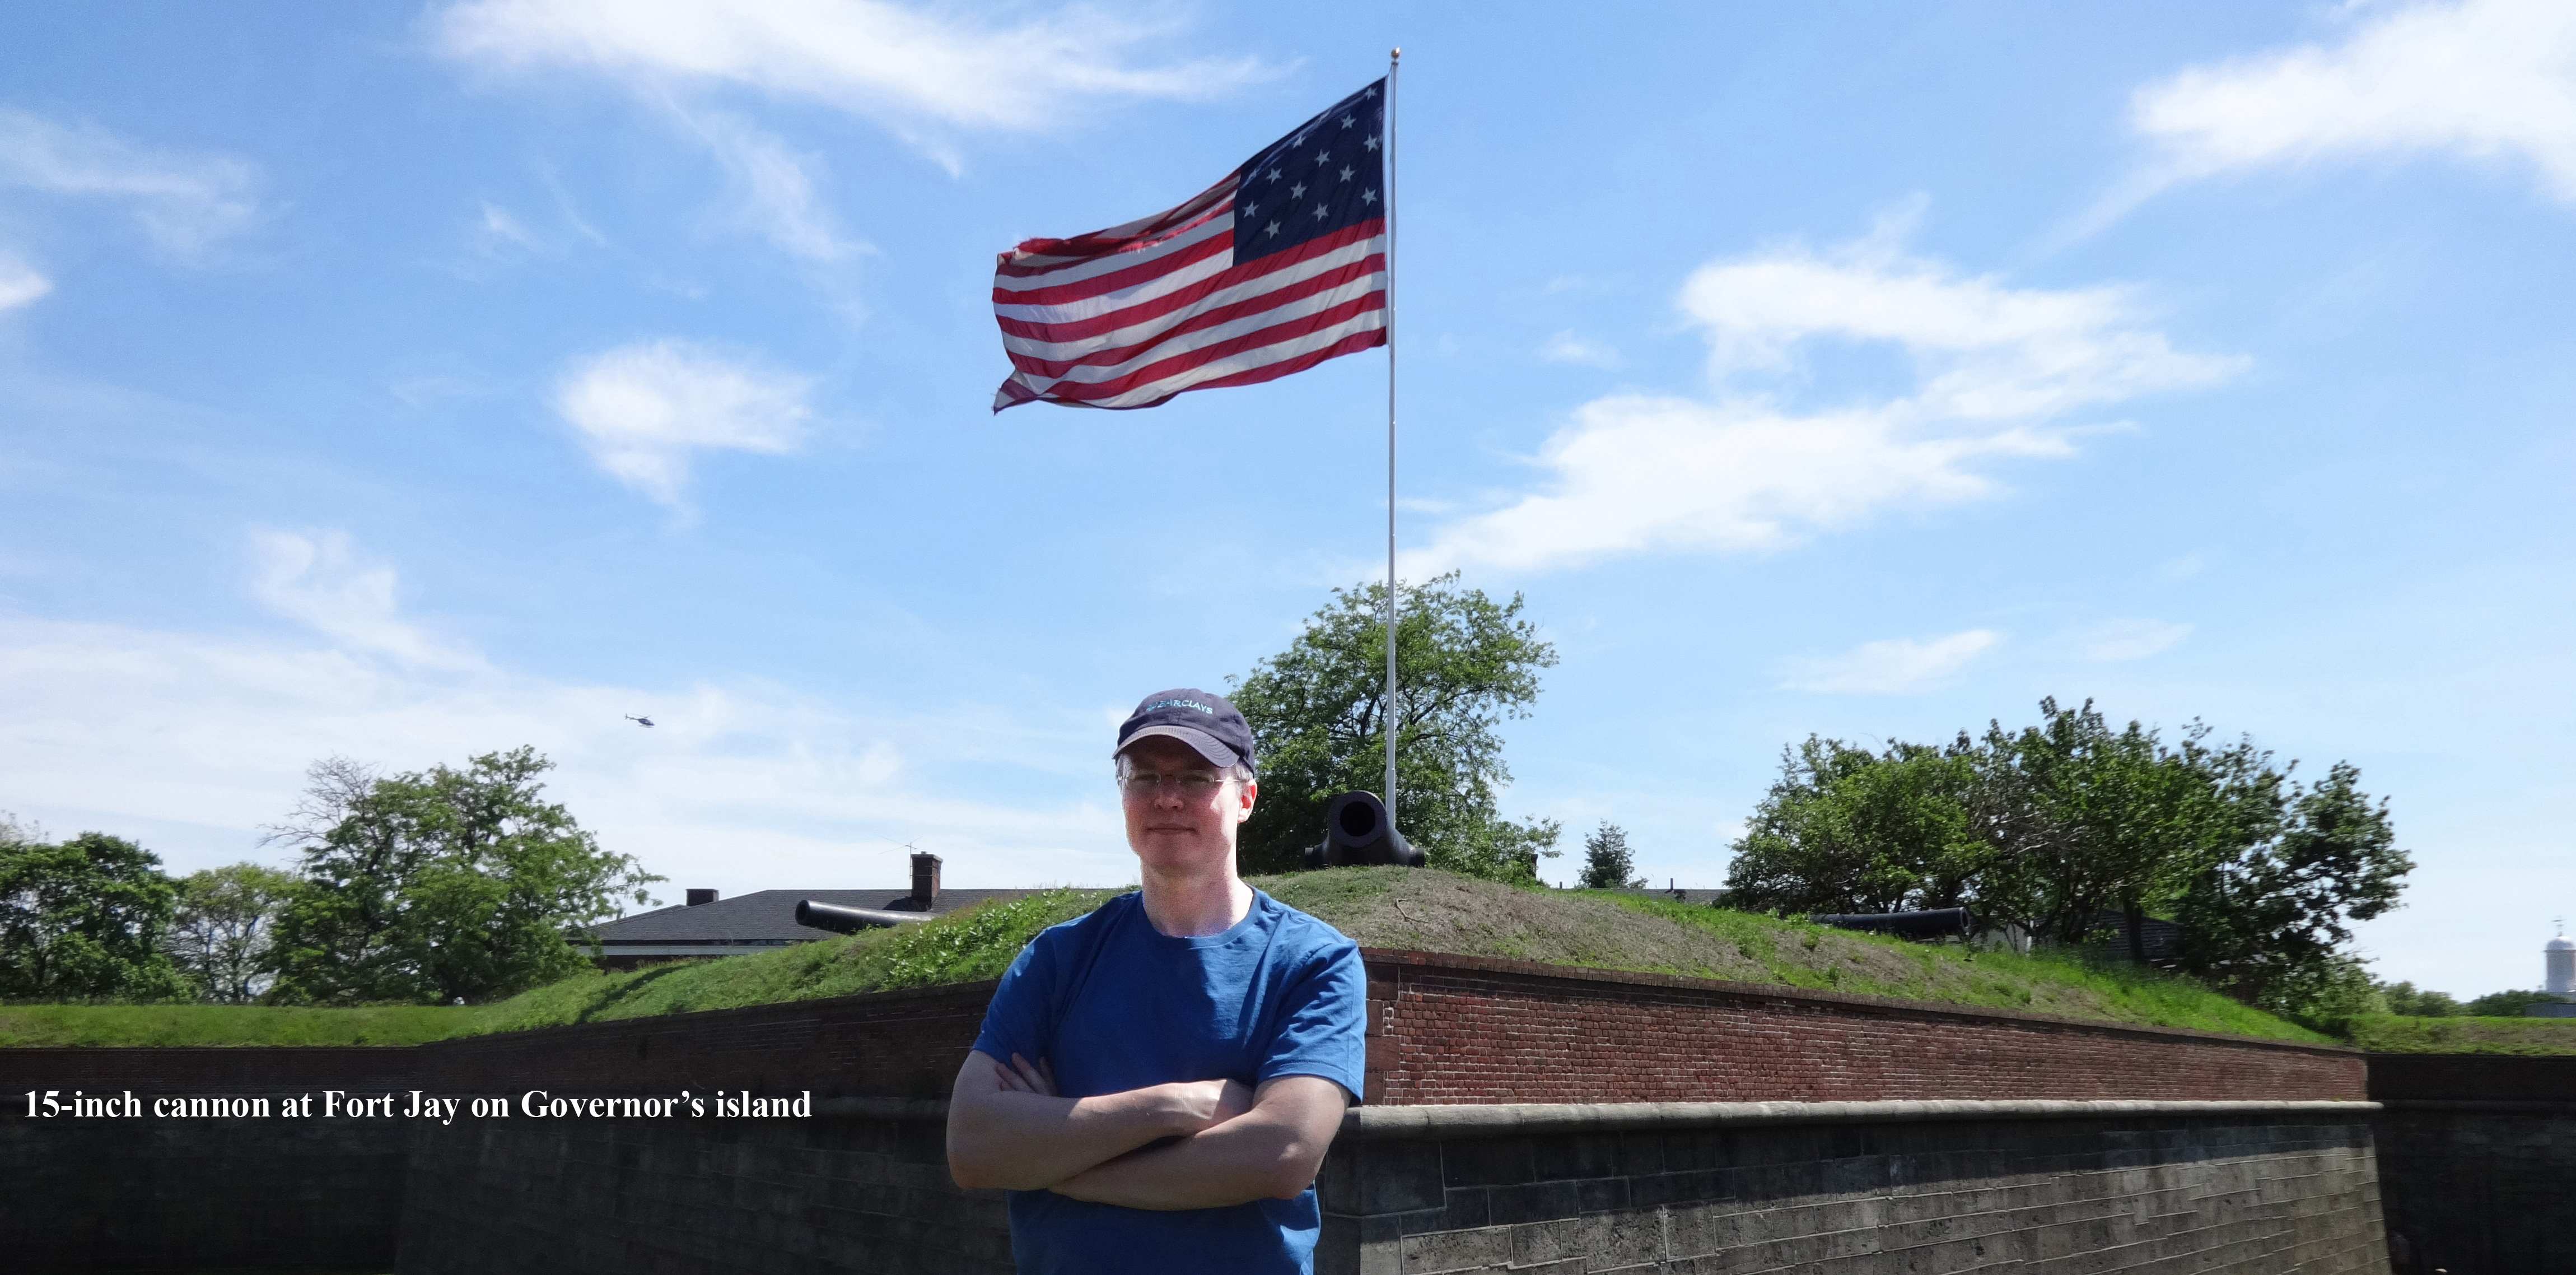 Patriotic Greer by cannon and flag Governors Island 2